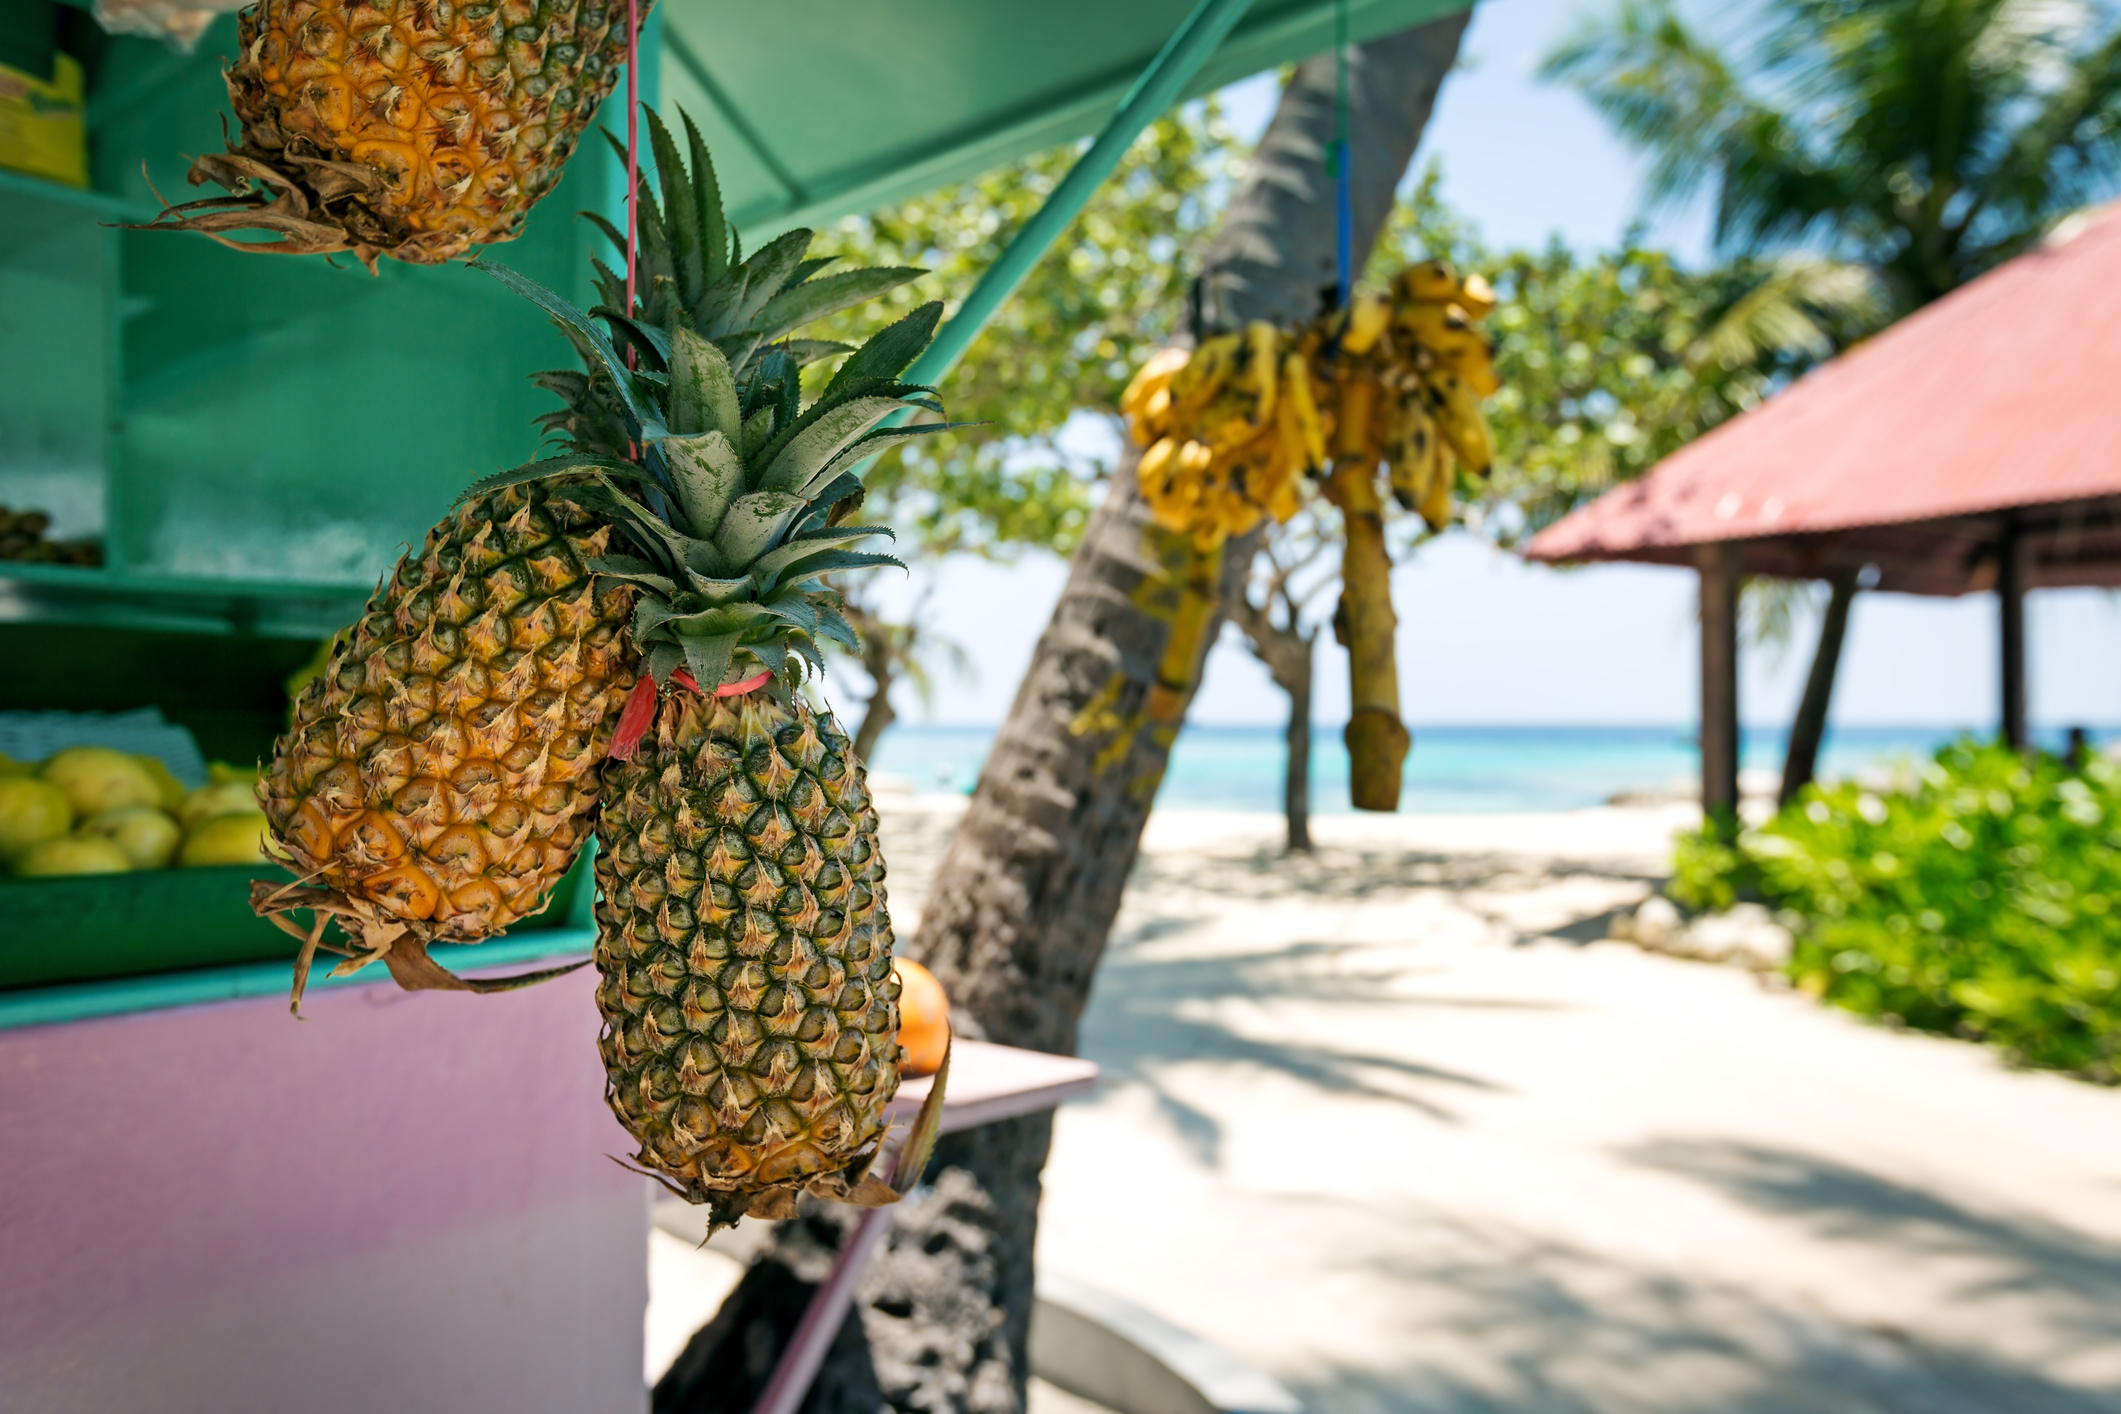 Tropical fruit stand with pineapples and bananas, beach and palm trees in the background